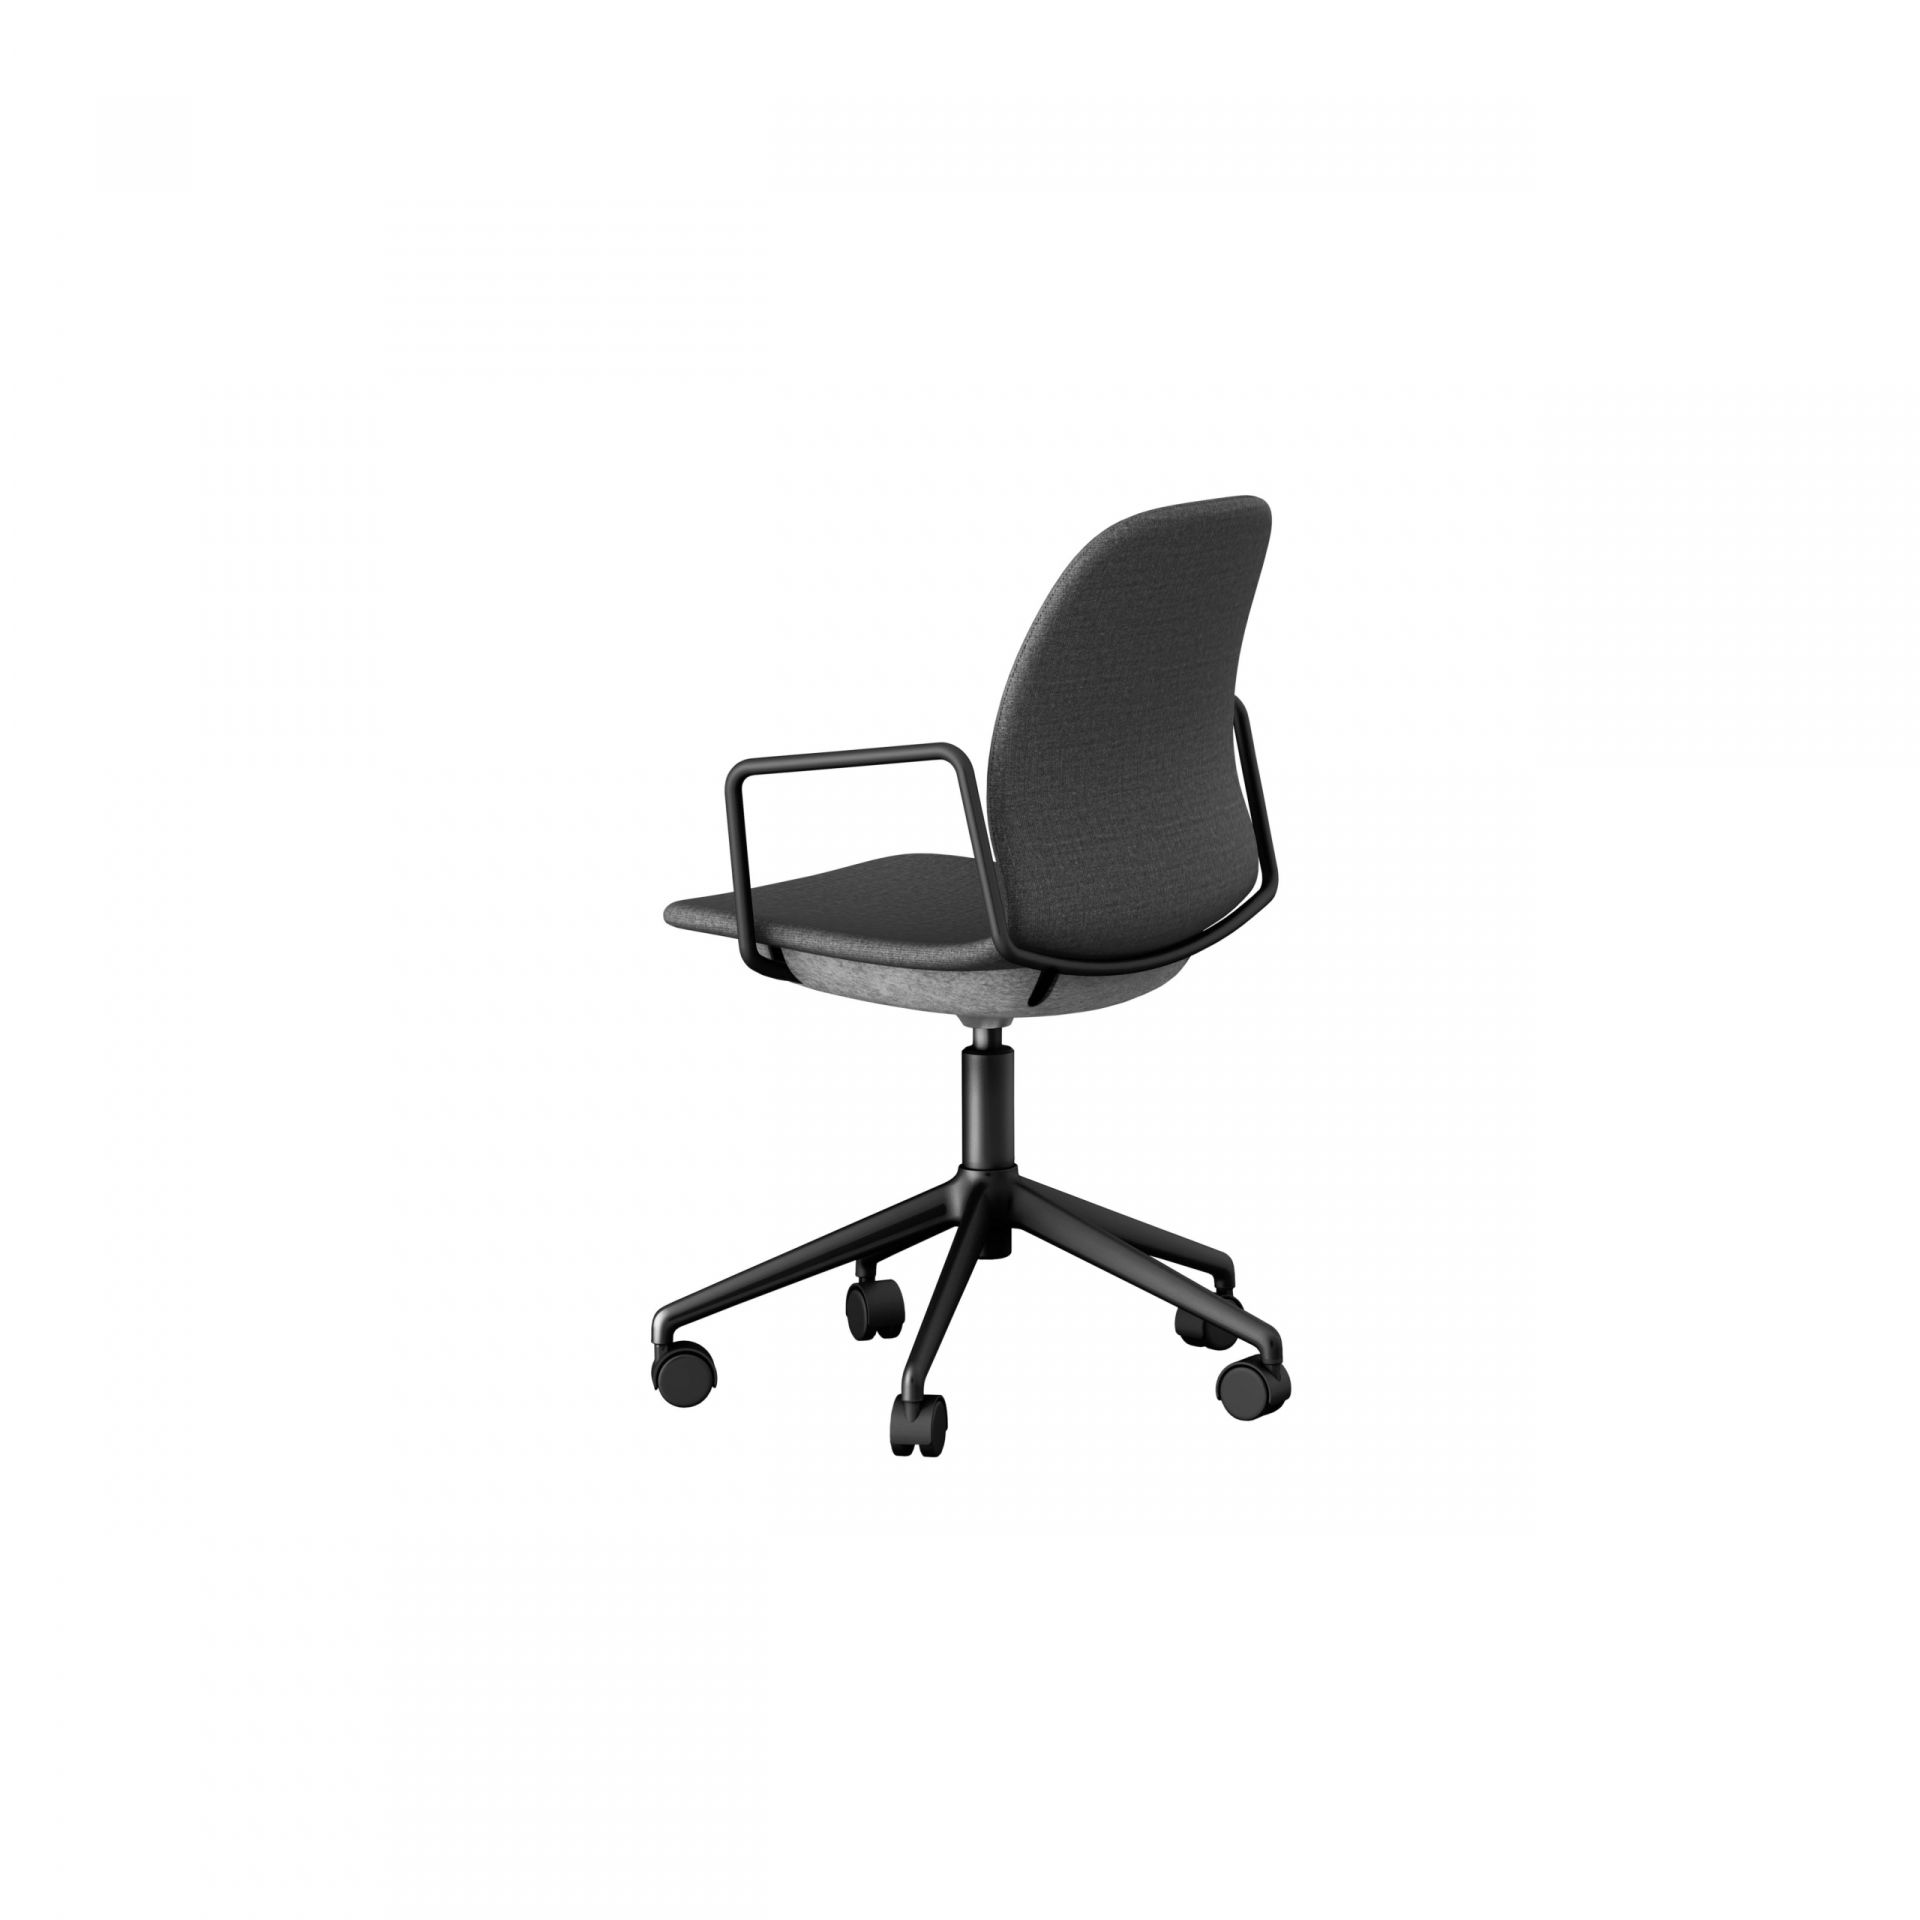 Archie Chair with swivel base product image 2